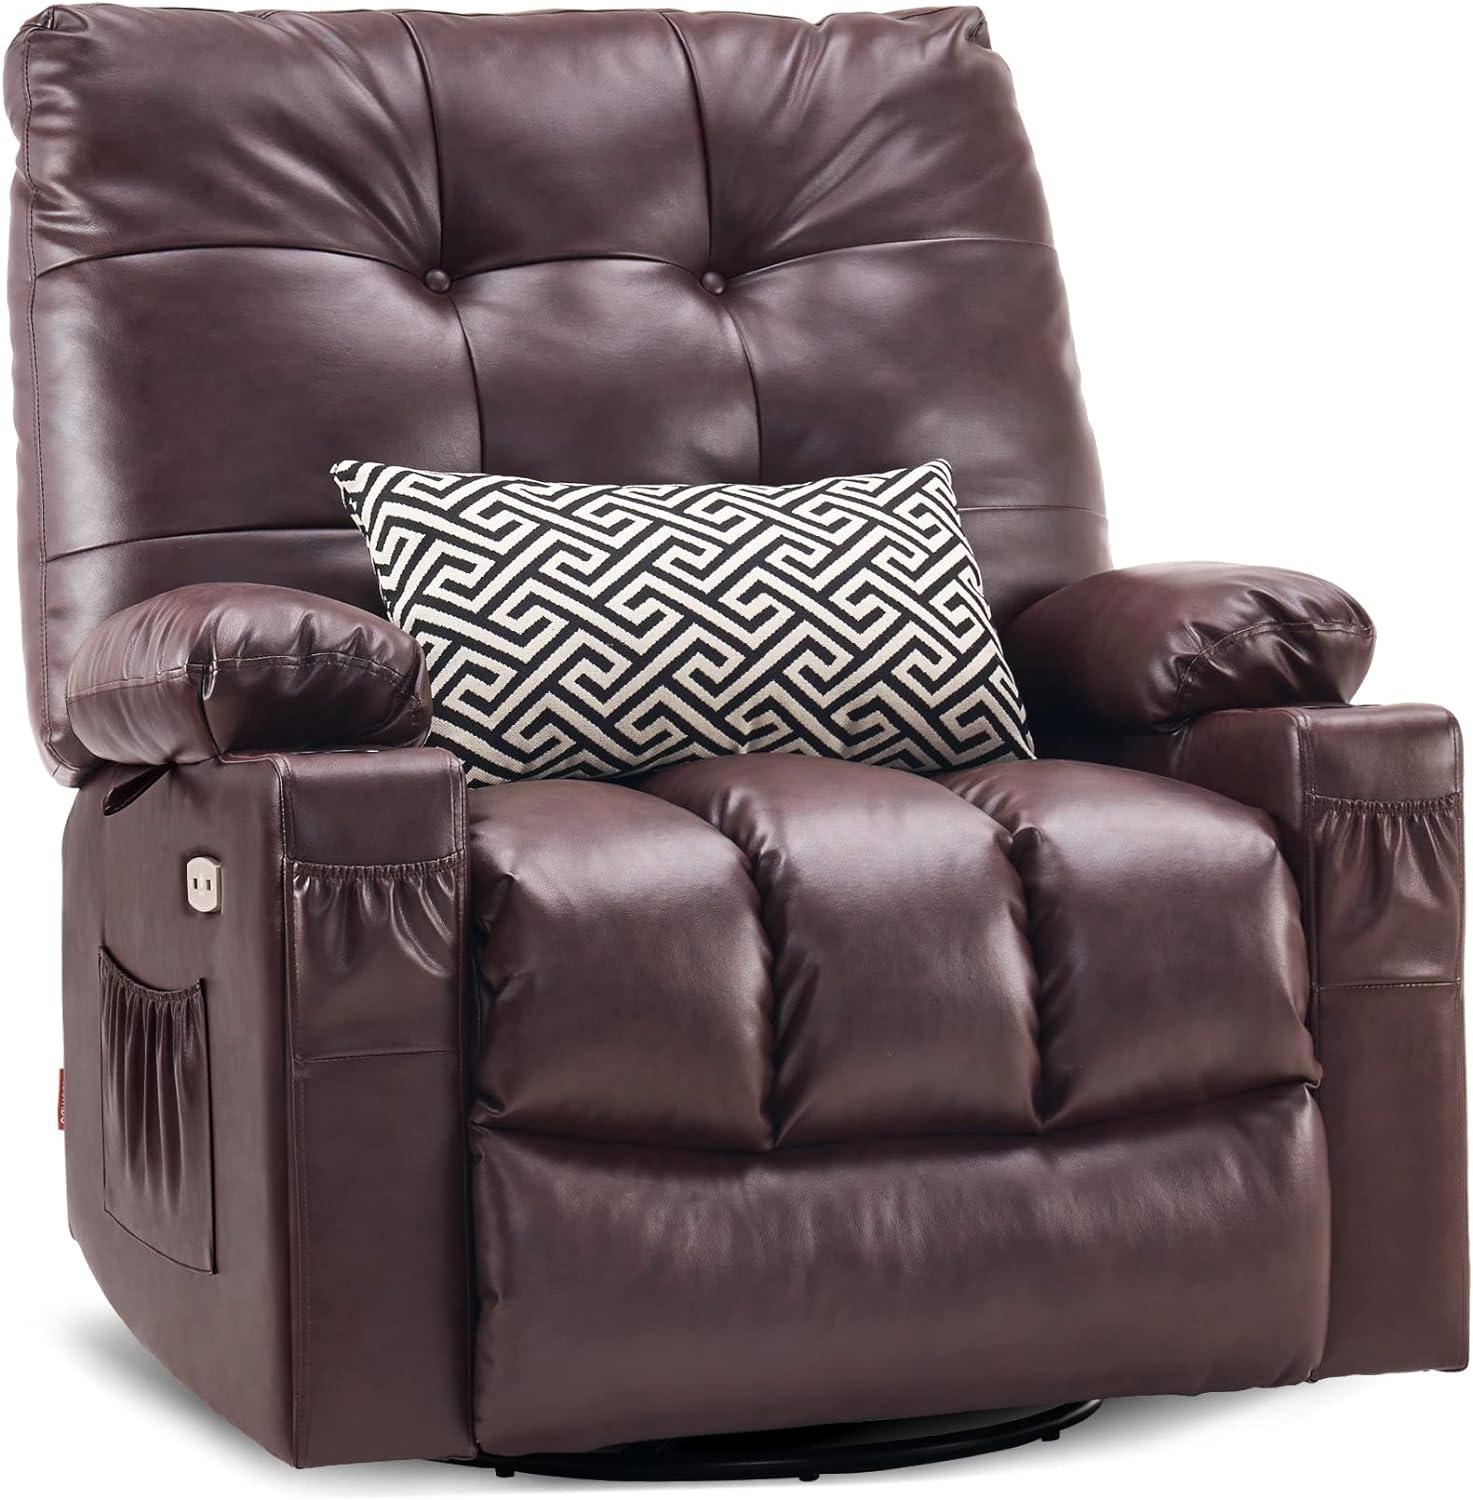 Mcombo Large Power Swivel Glider Rocker Recliner Chair with Massage and Heat for Nursery and USB Ports, Cup Holders 7748